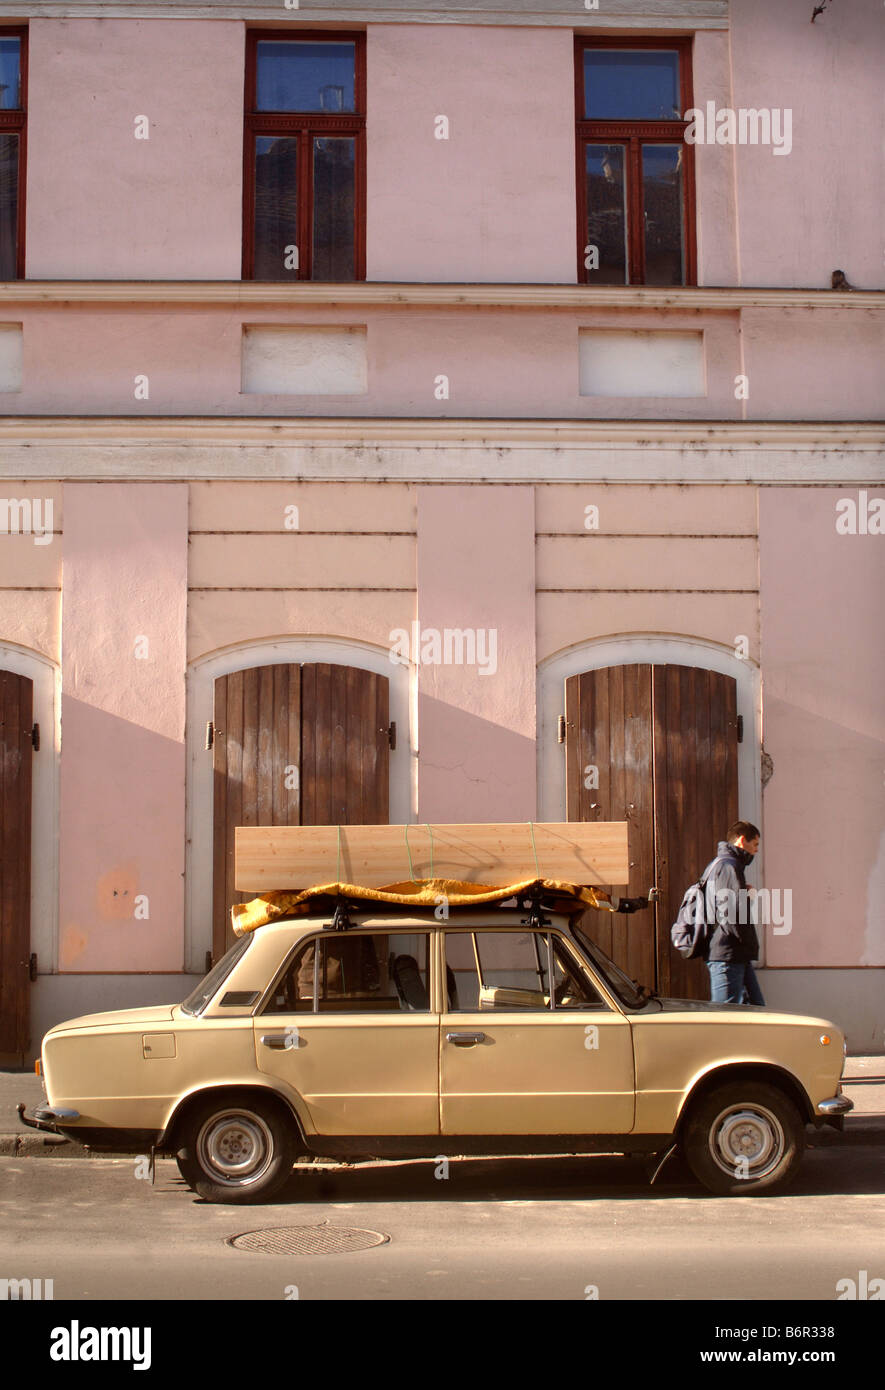 A LADA CAR WITH TIMBER CARRIED ON THE ROOF IN SZEGED HUNGARY Stock Photo